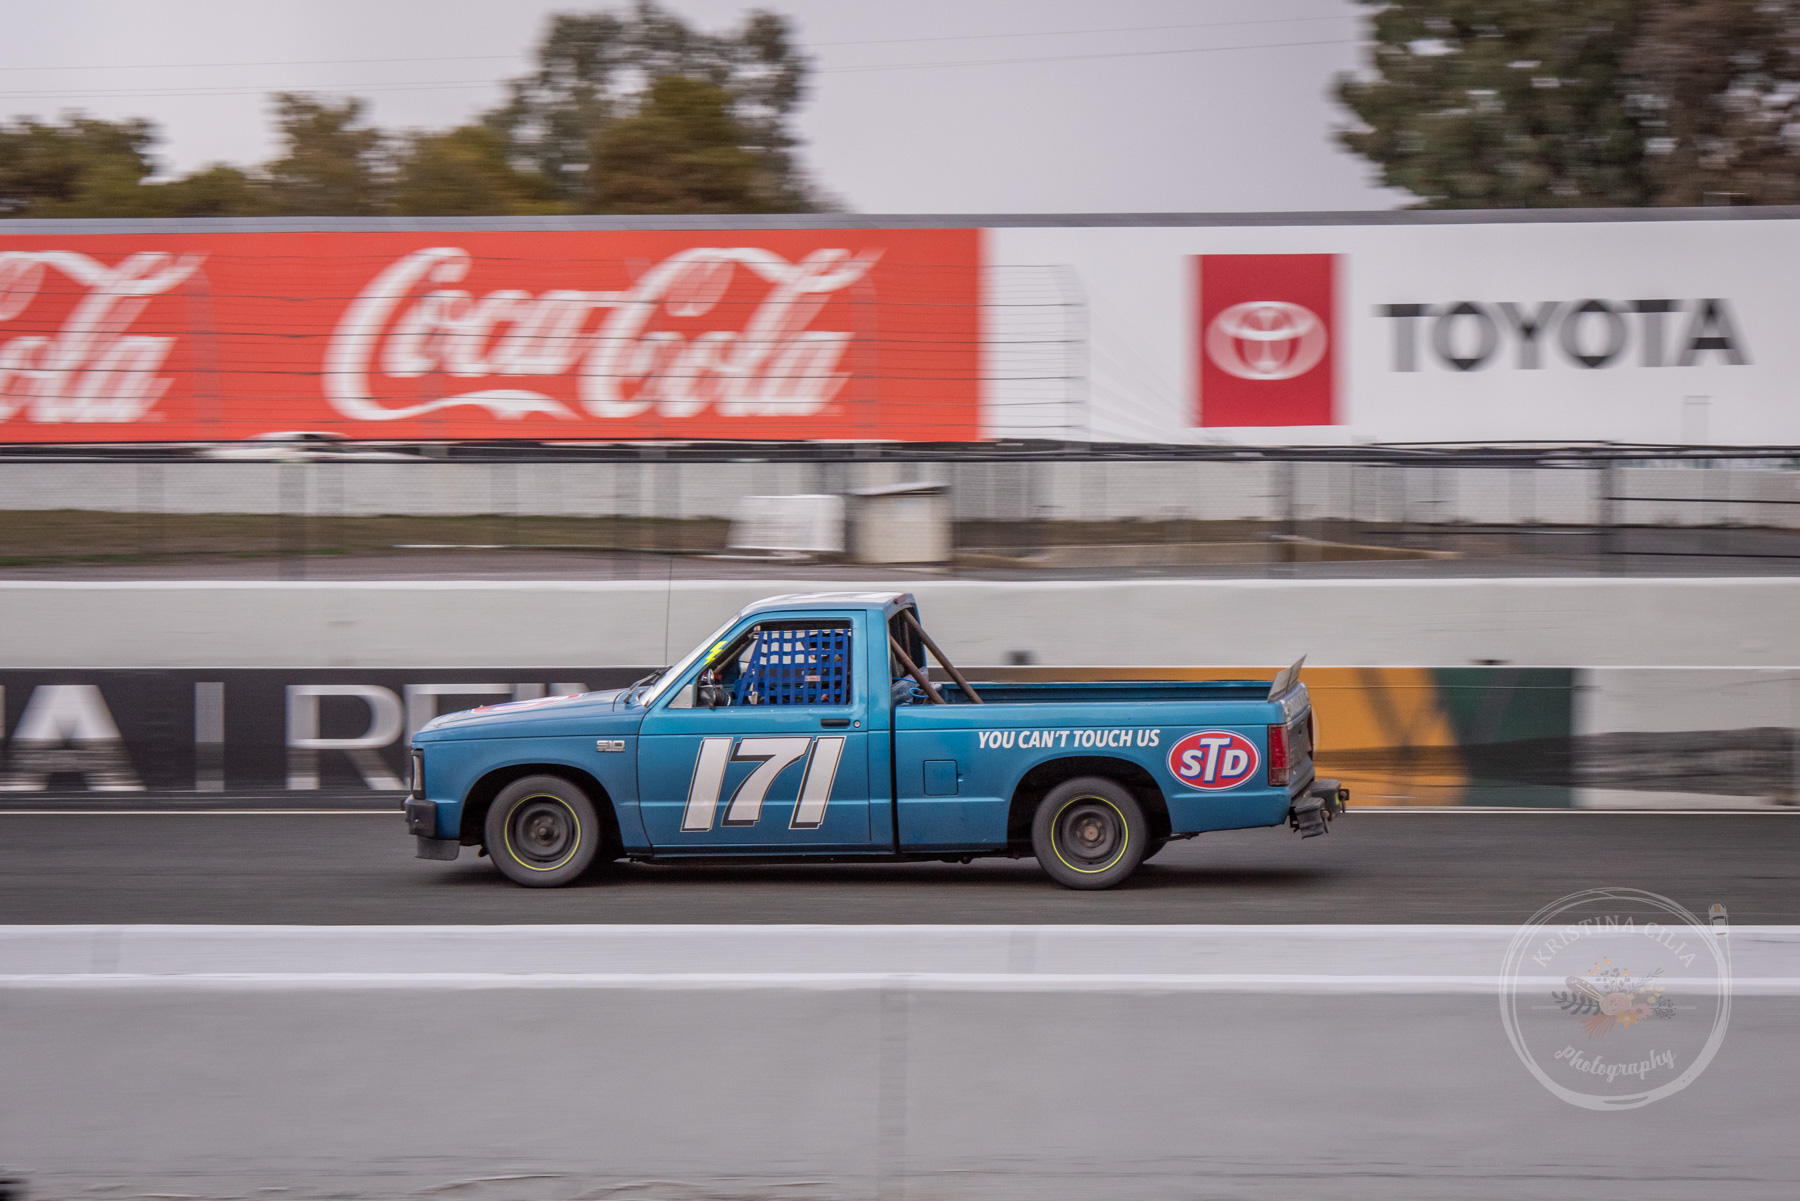 1989 Chevrolet S10 driven by Contagious Racing